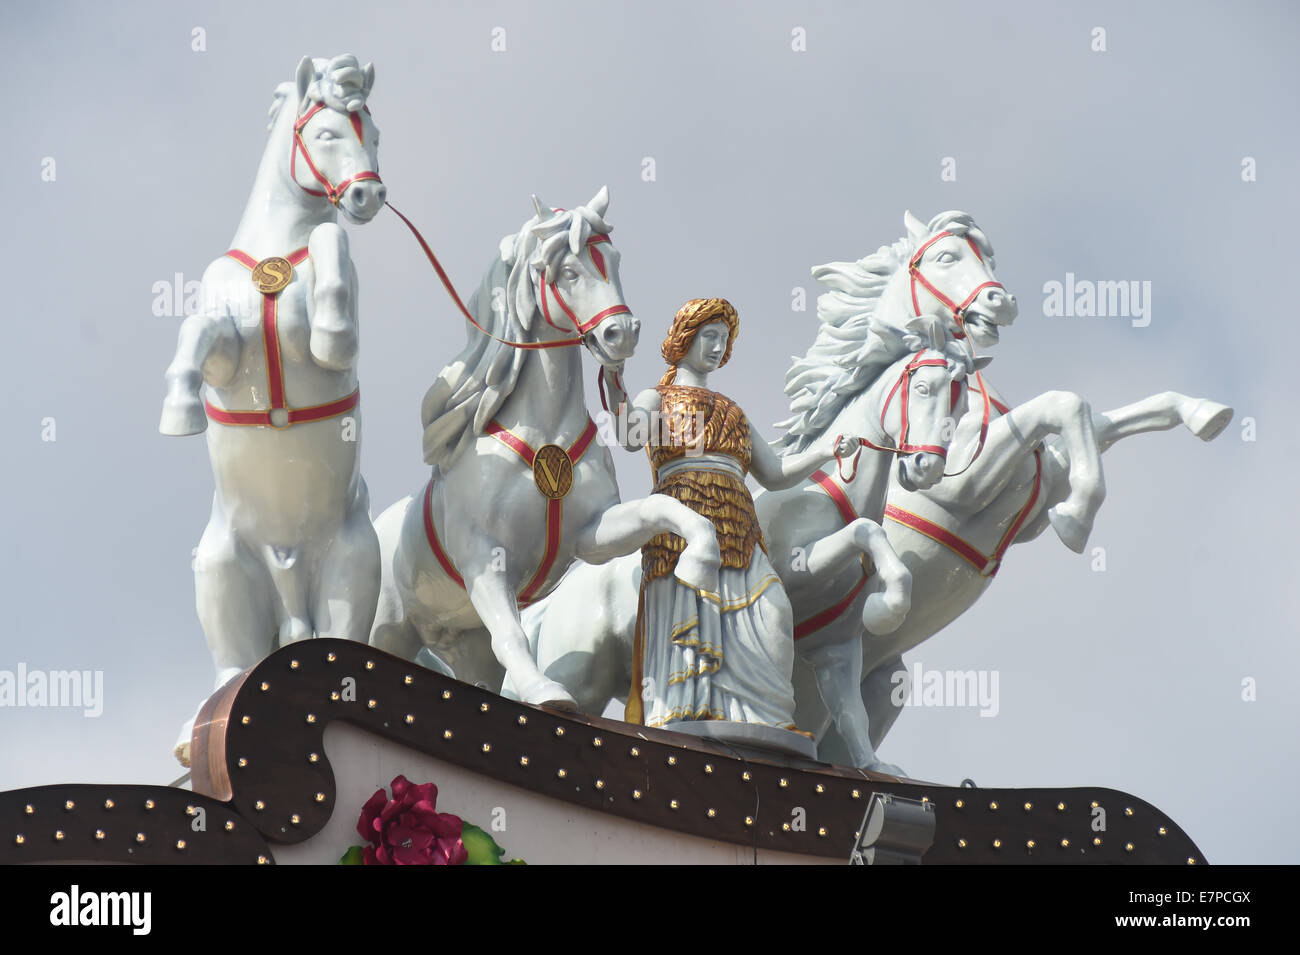 Munich, Germany. 22nd Sep, 2014. Horse statues are pictured on the roof of the Marstall festival tent at Oktoberfest in Munich, Germany, 22 September 2014. Horses are closesly connected to horses. Oktoberfest is the world's largest funfair and it grew out of horse races held in honour of the Royal bridal couple Ludwig of Bavaria and Therese of Saxe-Hildburghausen. Photo: FELIX HOERHAGER/DPA/Alamy Live News Stock Photo